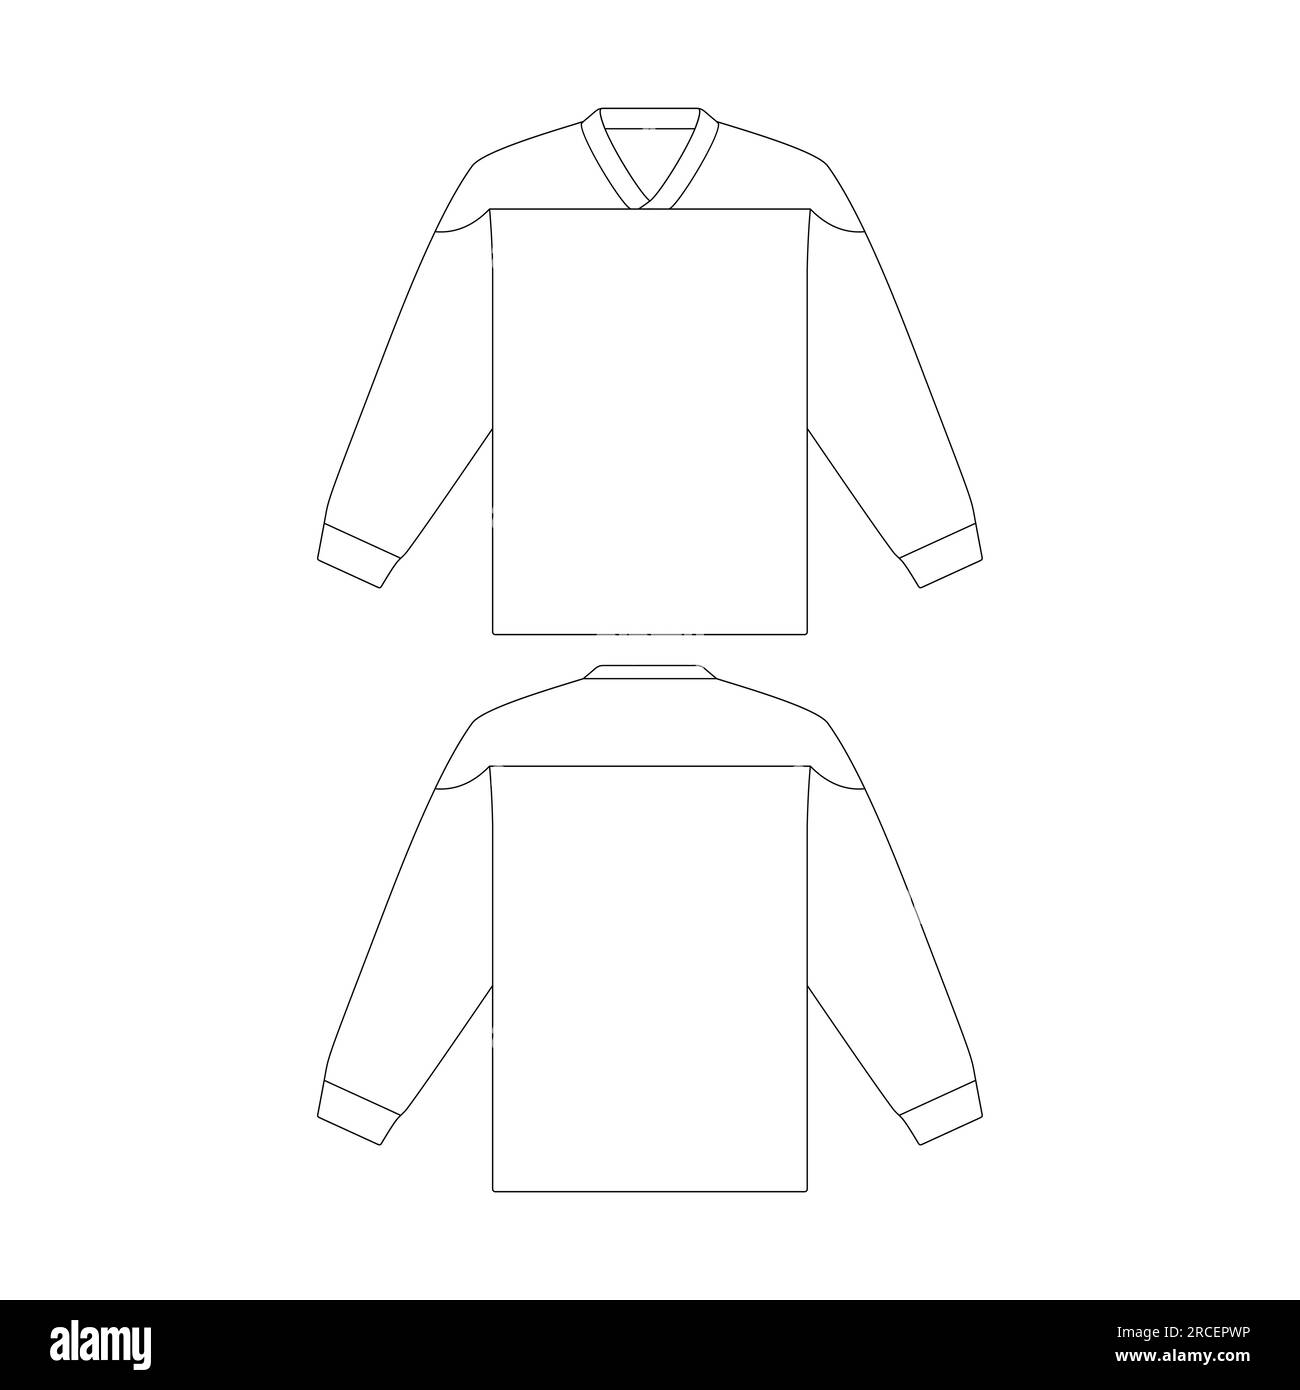 Hockey Jersey Template Stock Illustration - Download Image Now